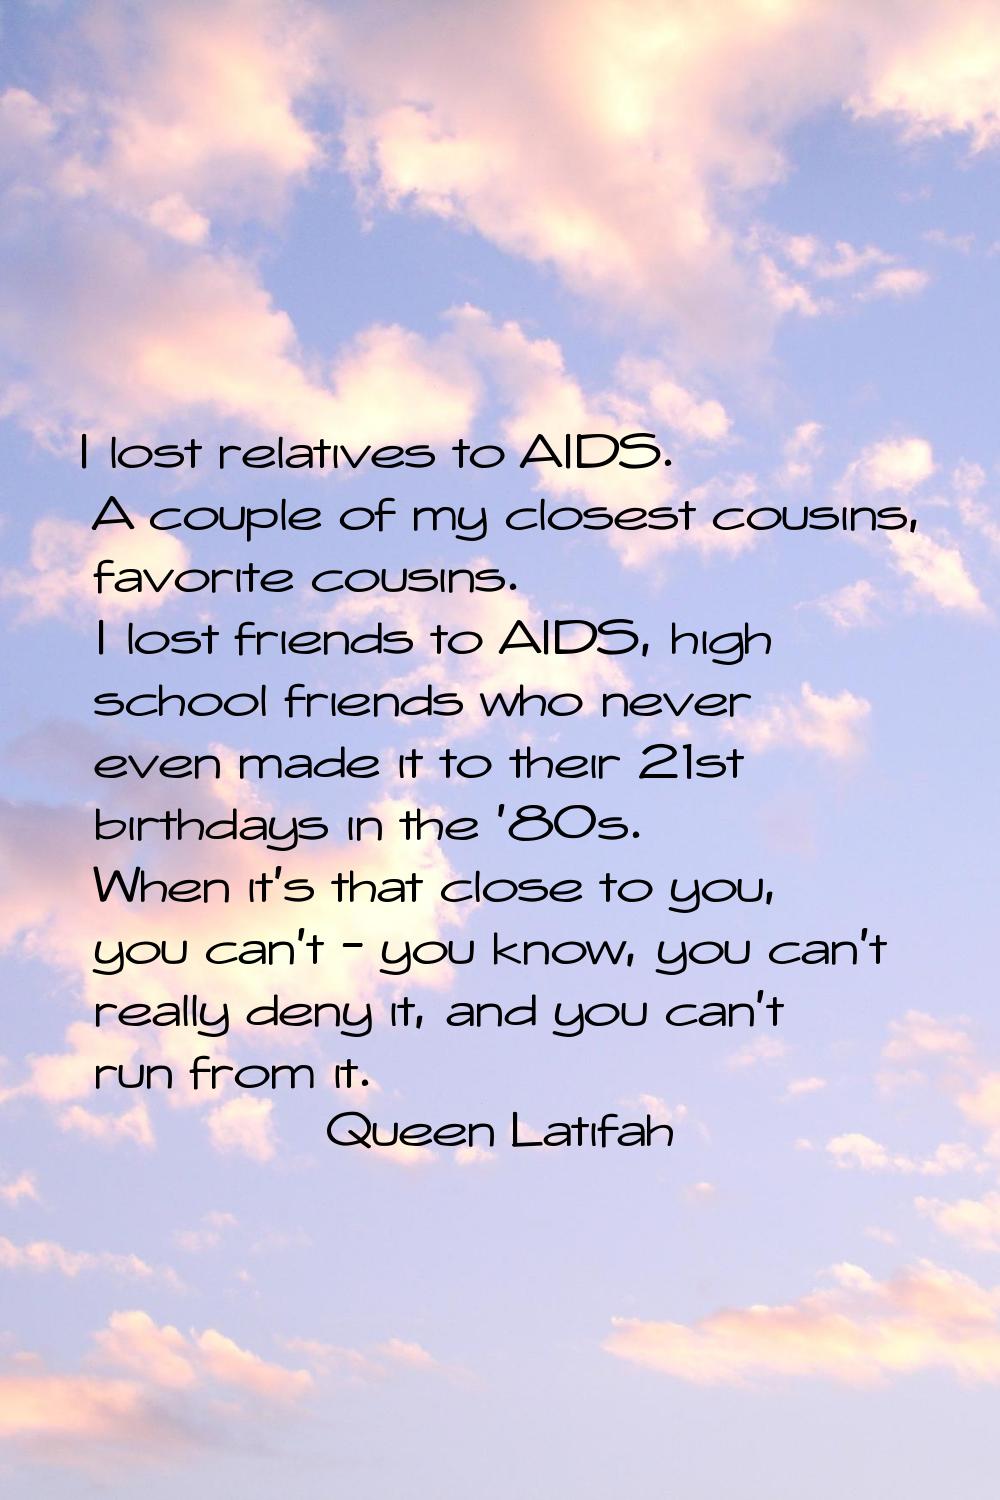 I lost relatives to AIDS. A couple of my closest cousins, favorite cousins. I lost friends to AIDS,